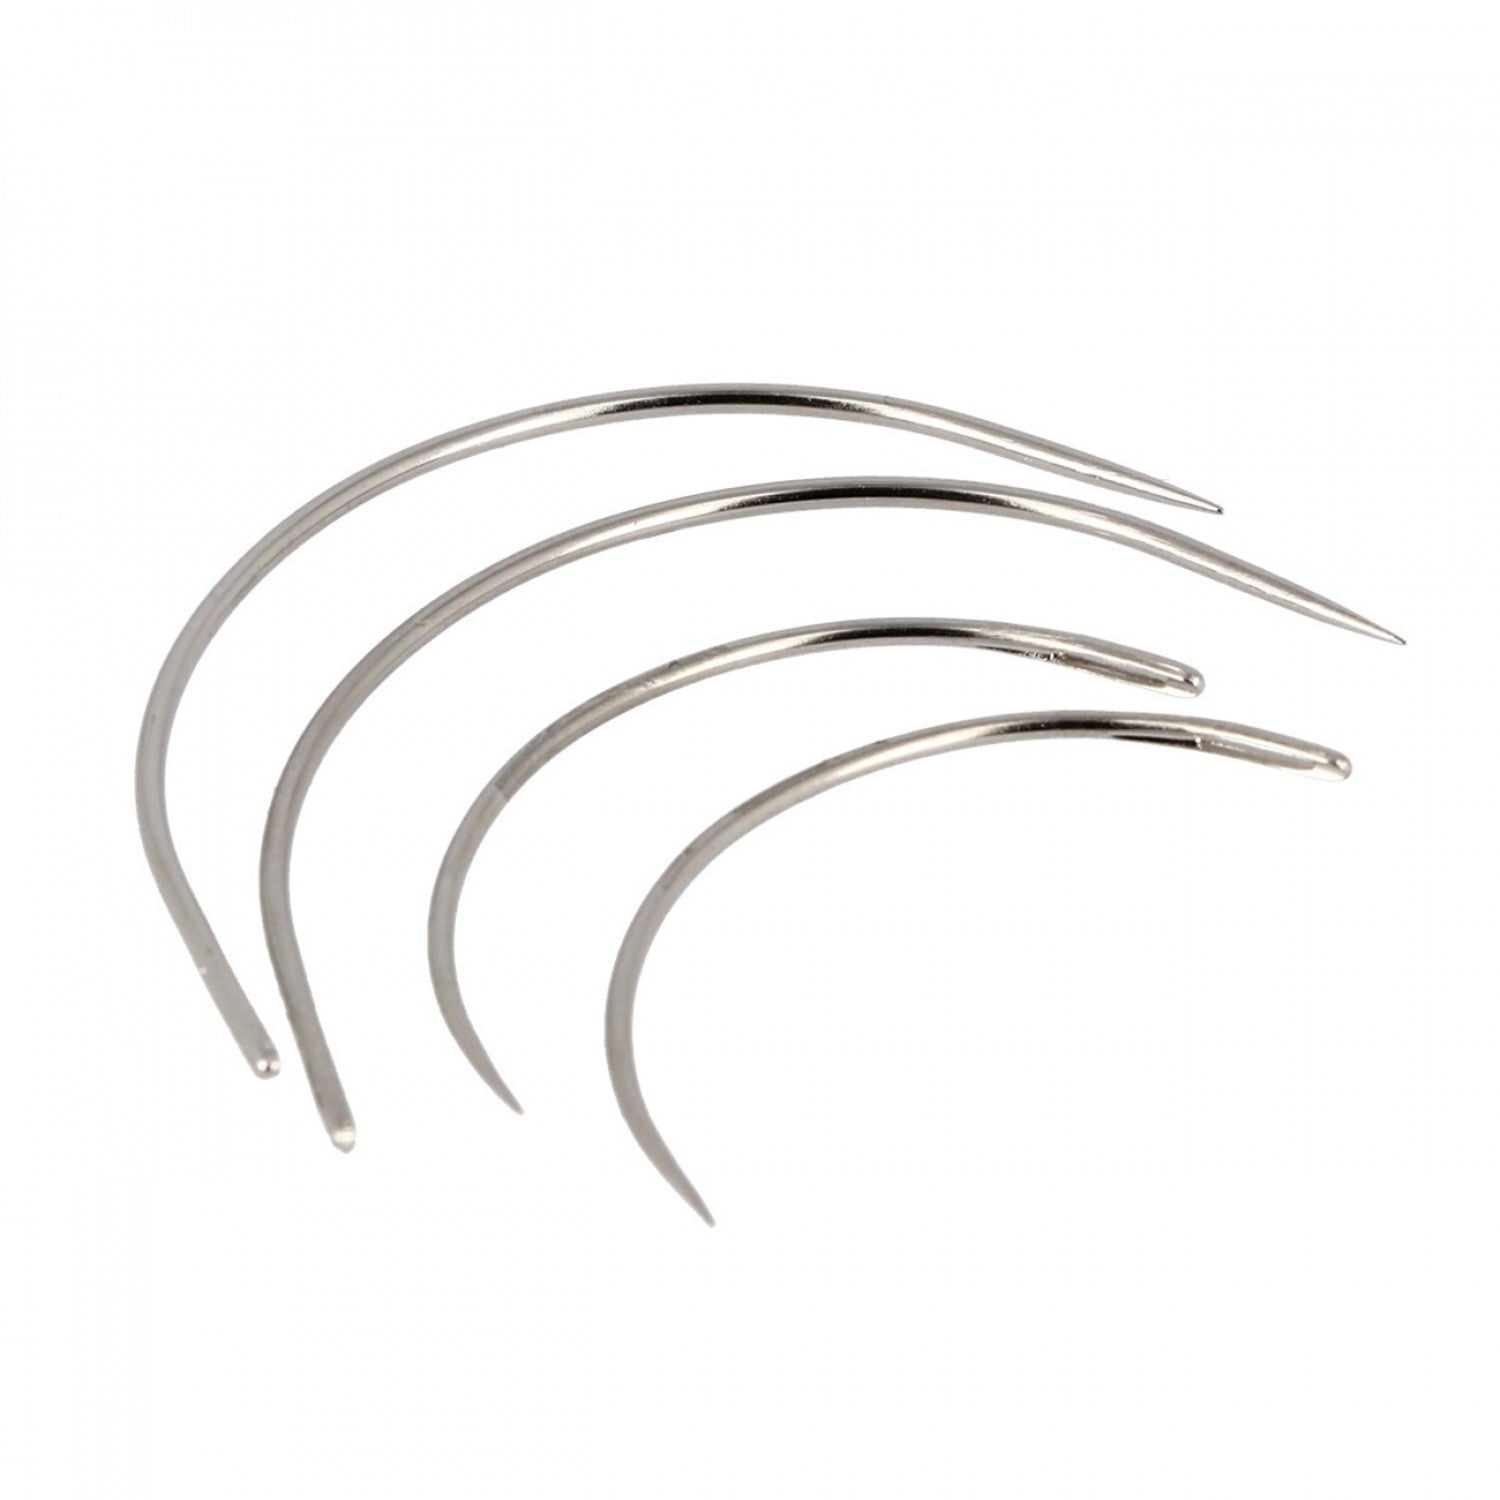 Bohin : Quilter's Curved Sewing Needles